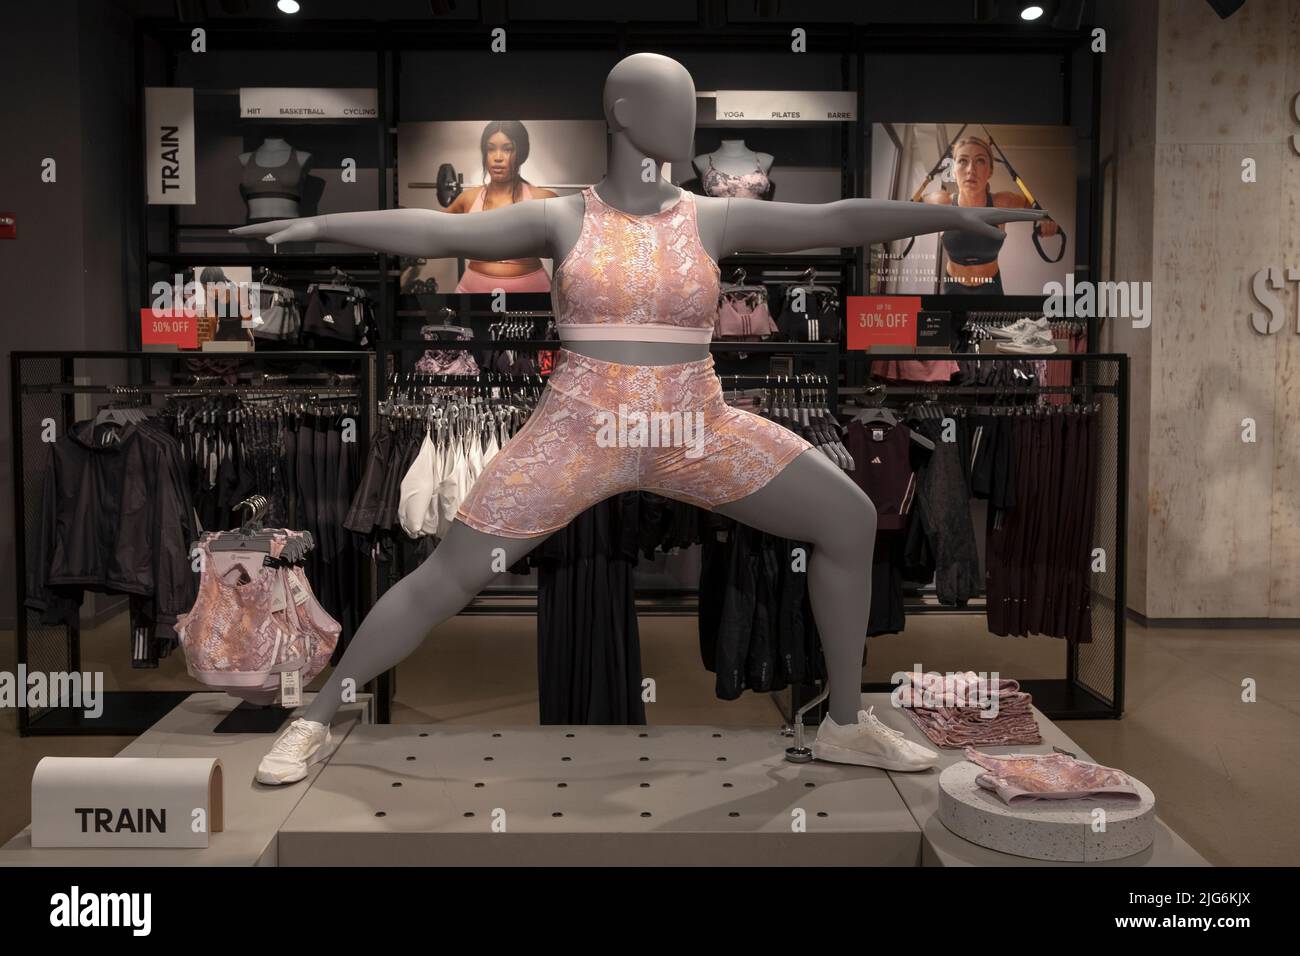 Nike becomes latest retailer to add plus-size mannequins